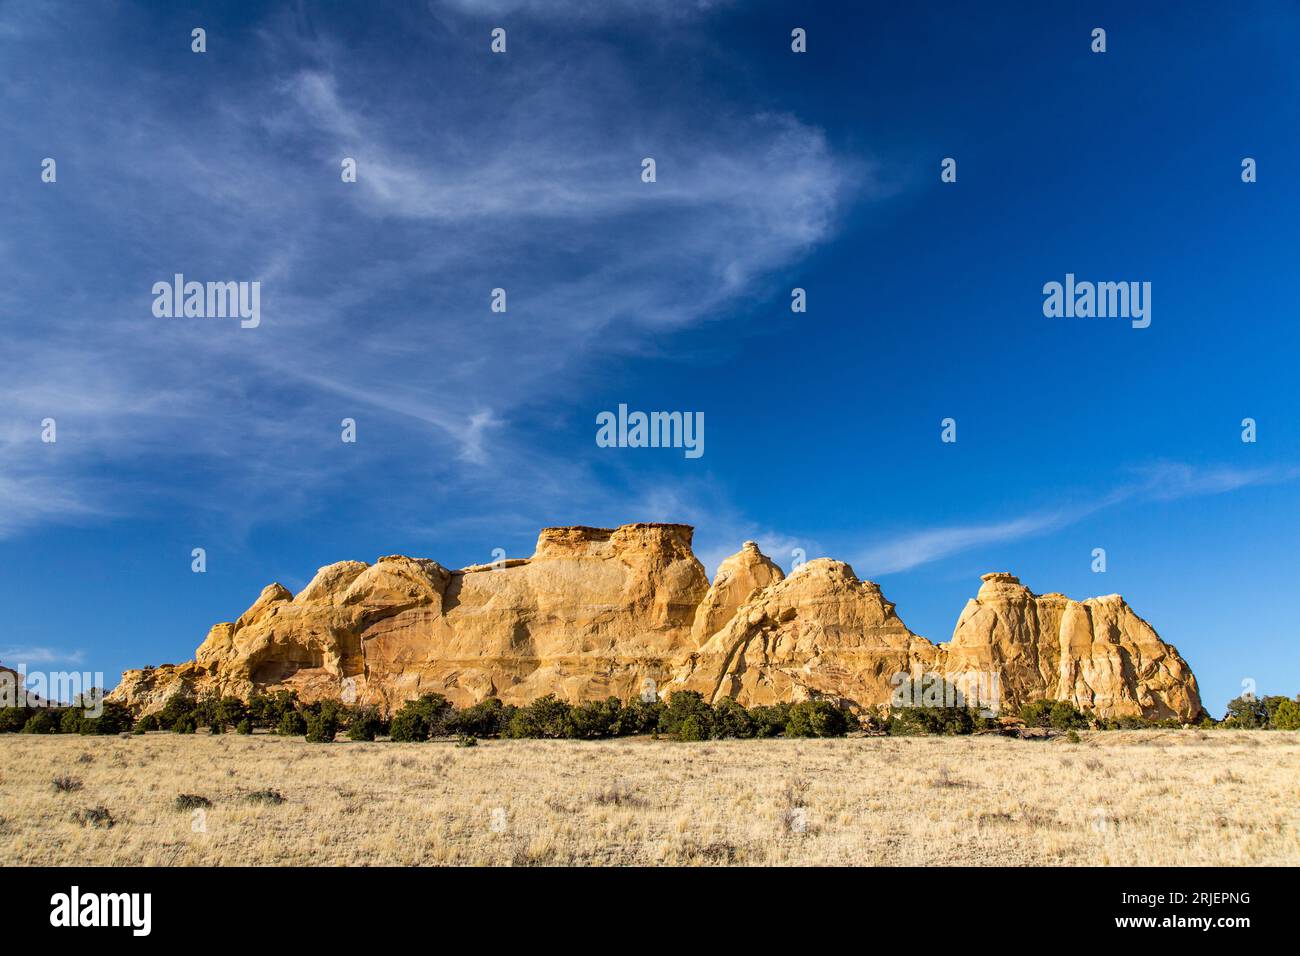 Locomotive Point, a colorful Navajo Sandstone monolith in the Head of Sinbad area of the San Rafael Swell in Utah. Stock Photo